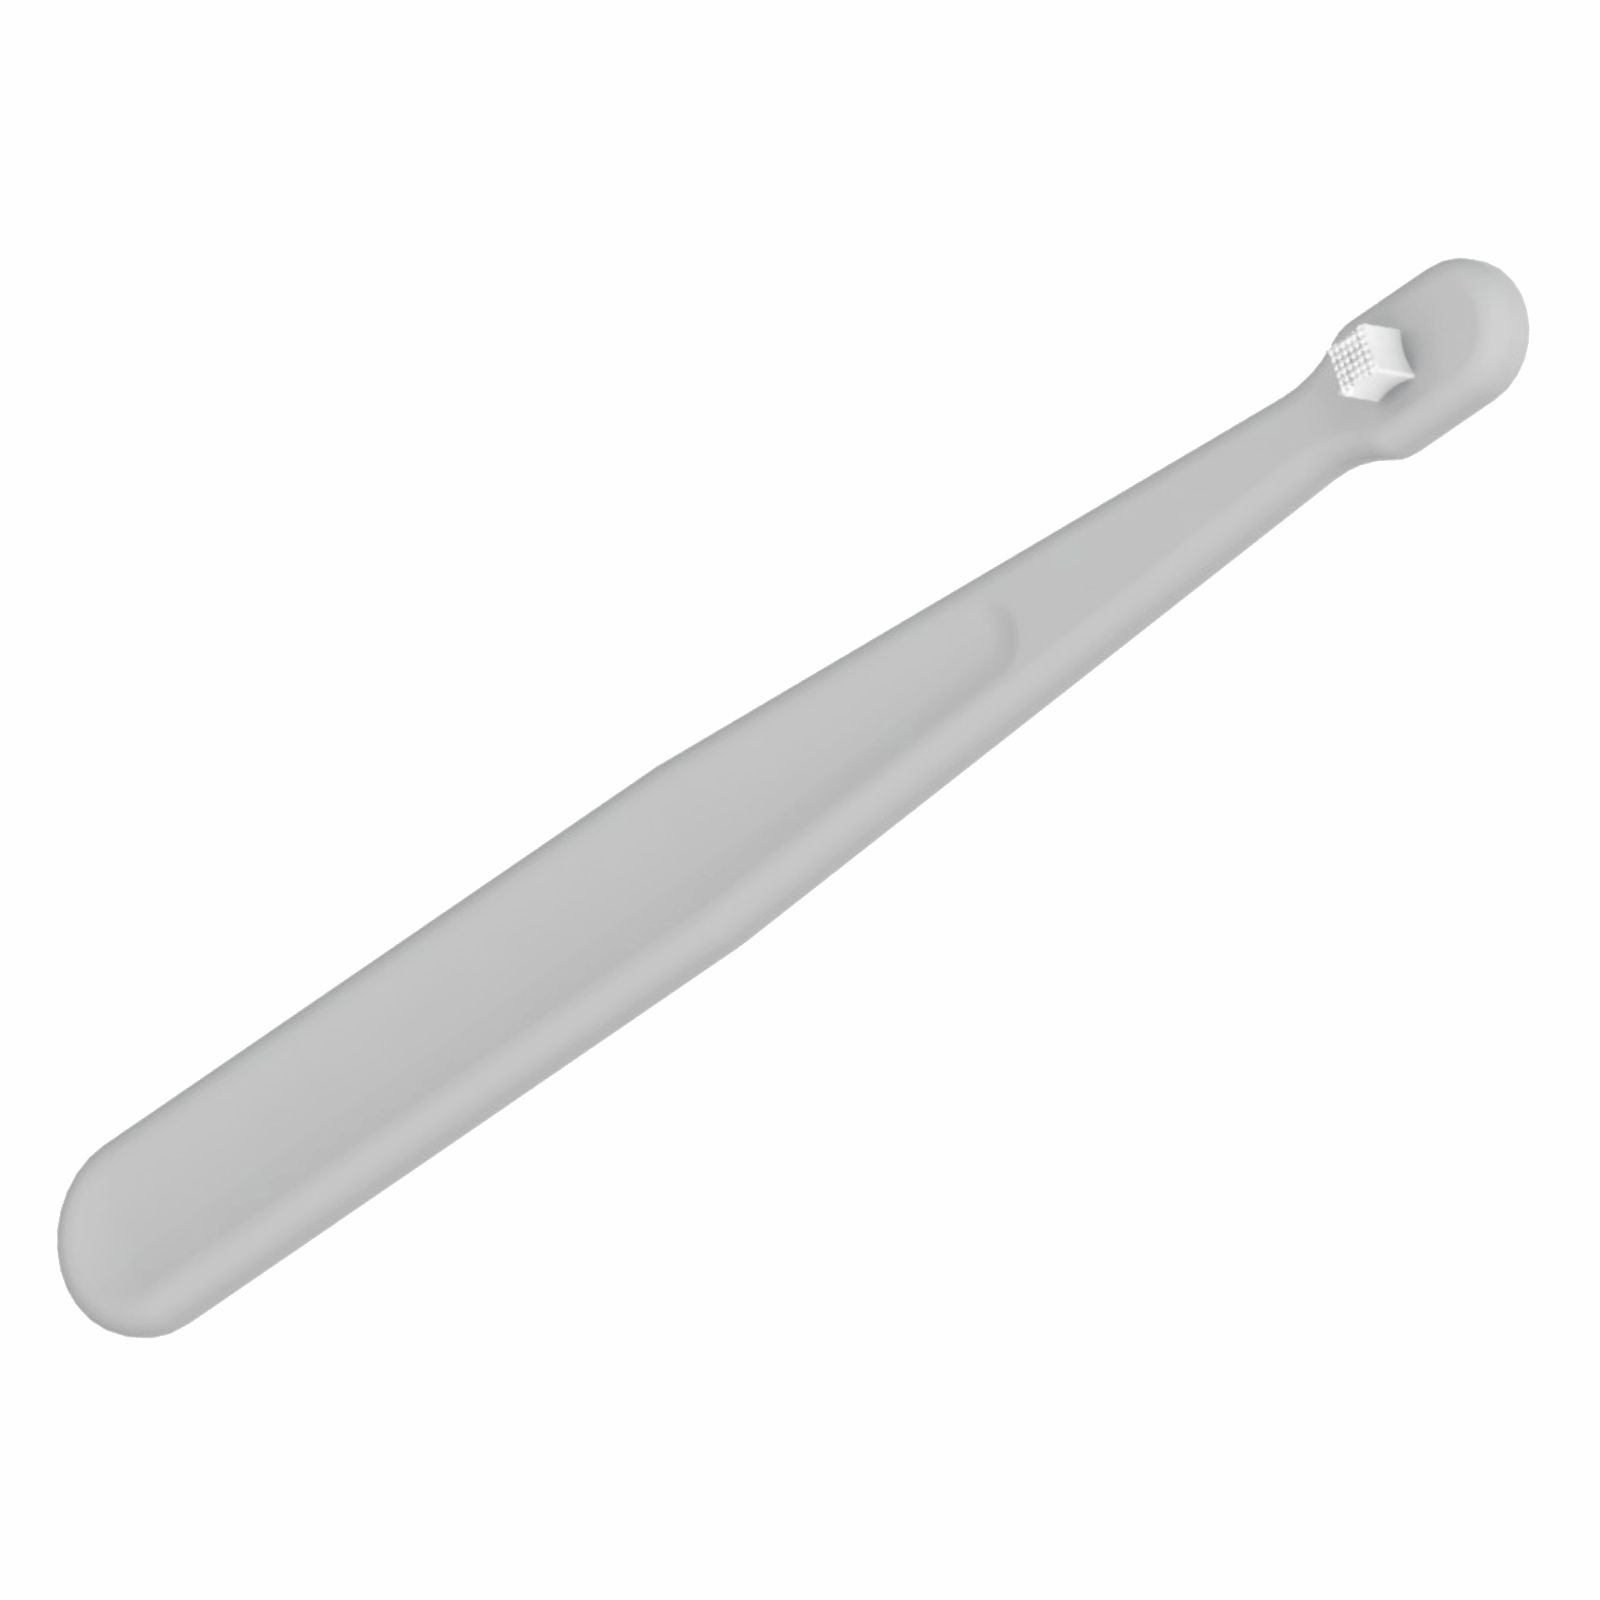 Morelli Band Seater Bite Stick with Square Tip